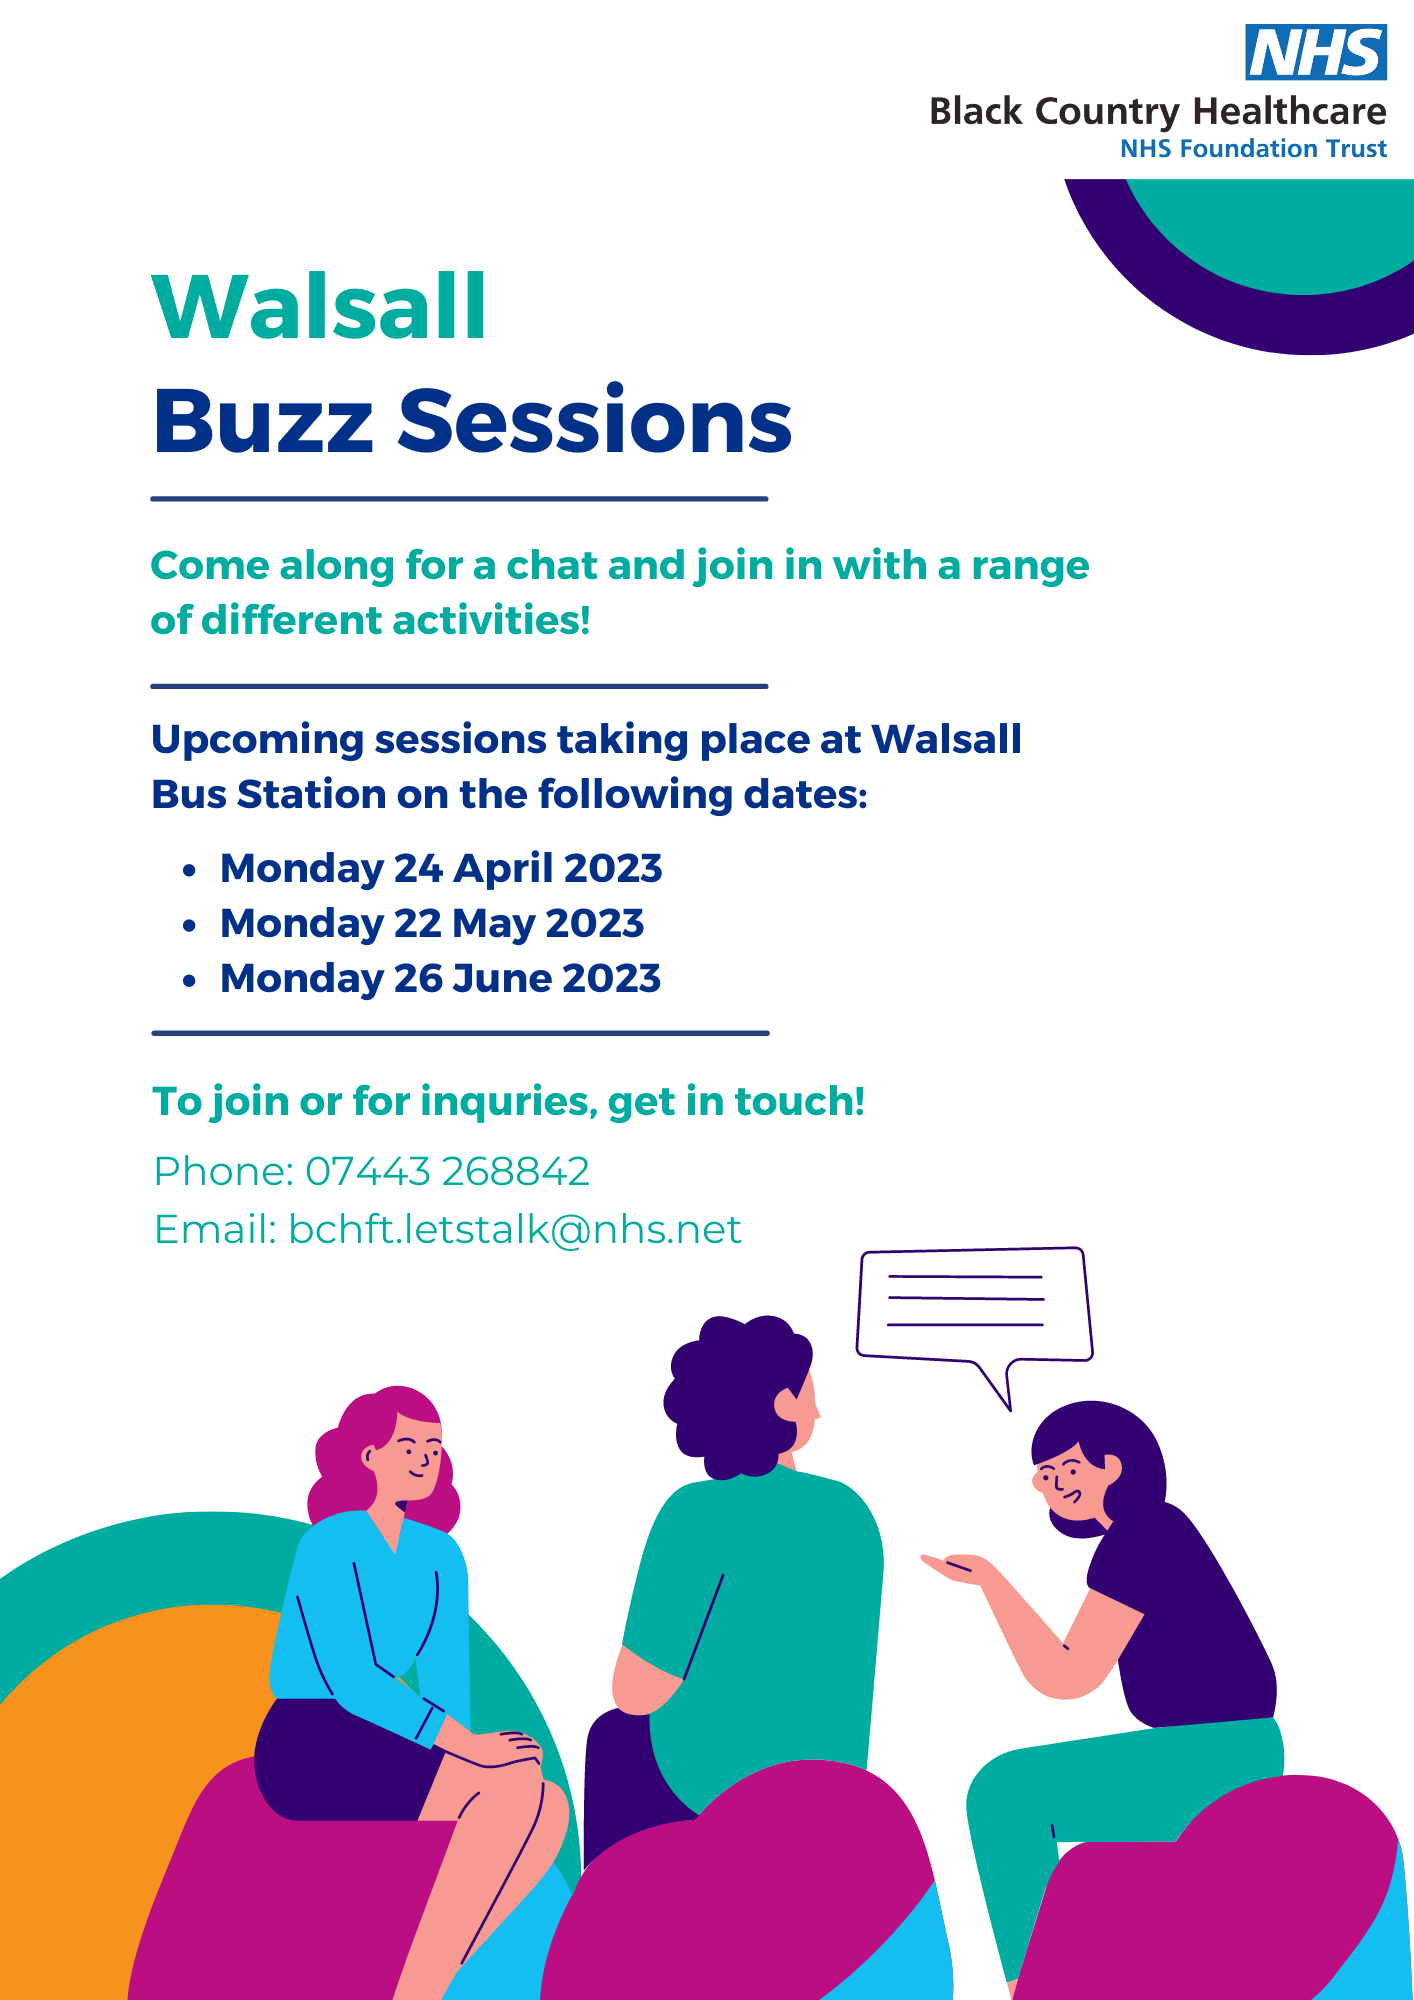 Walsall Buzz Sessions